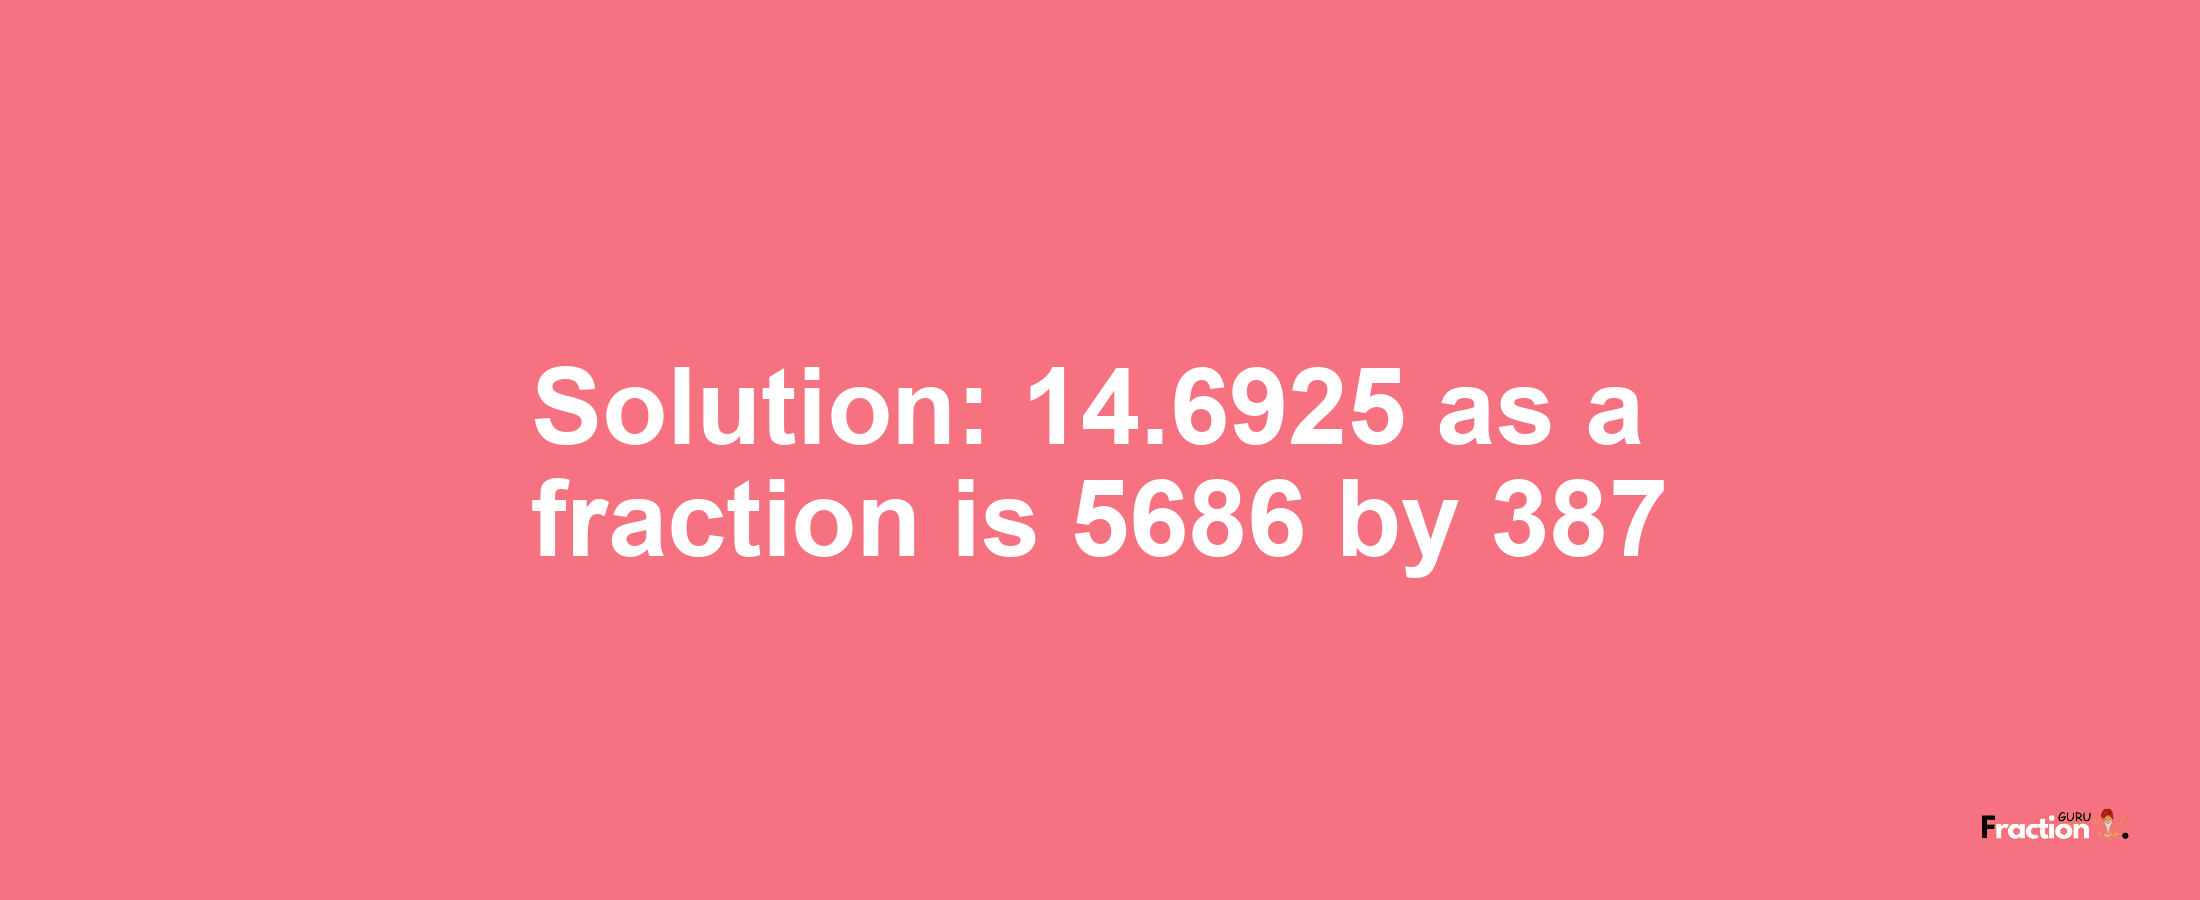 Solution:14.6925 as a fraction is 5686/387